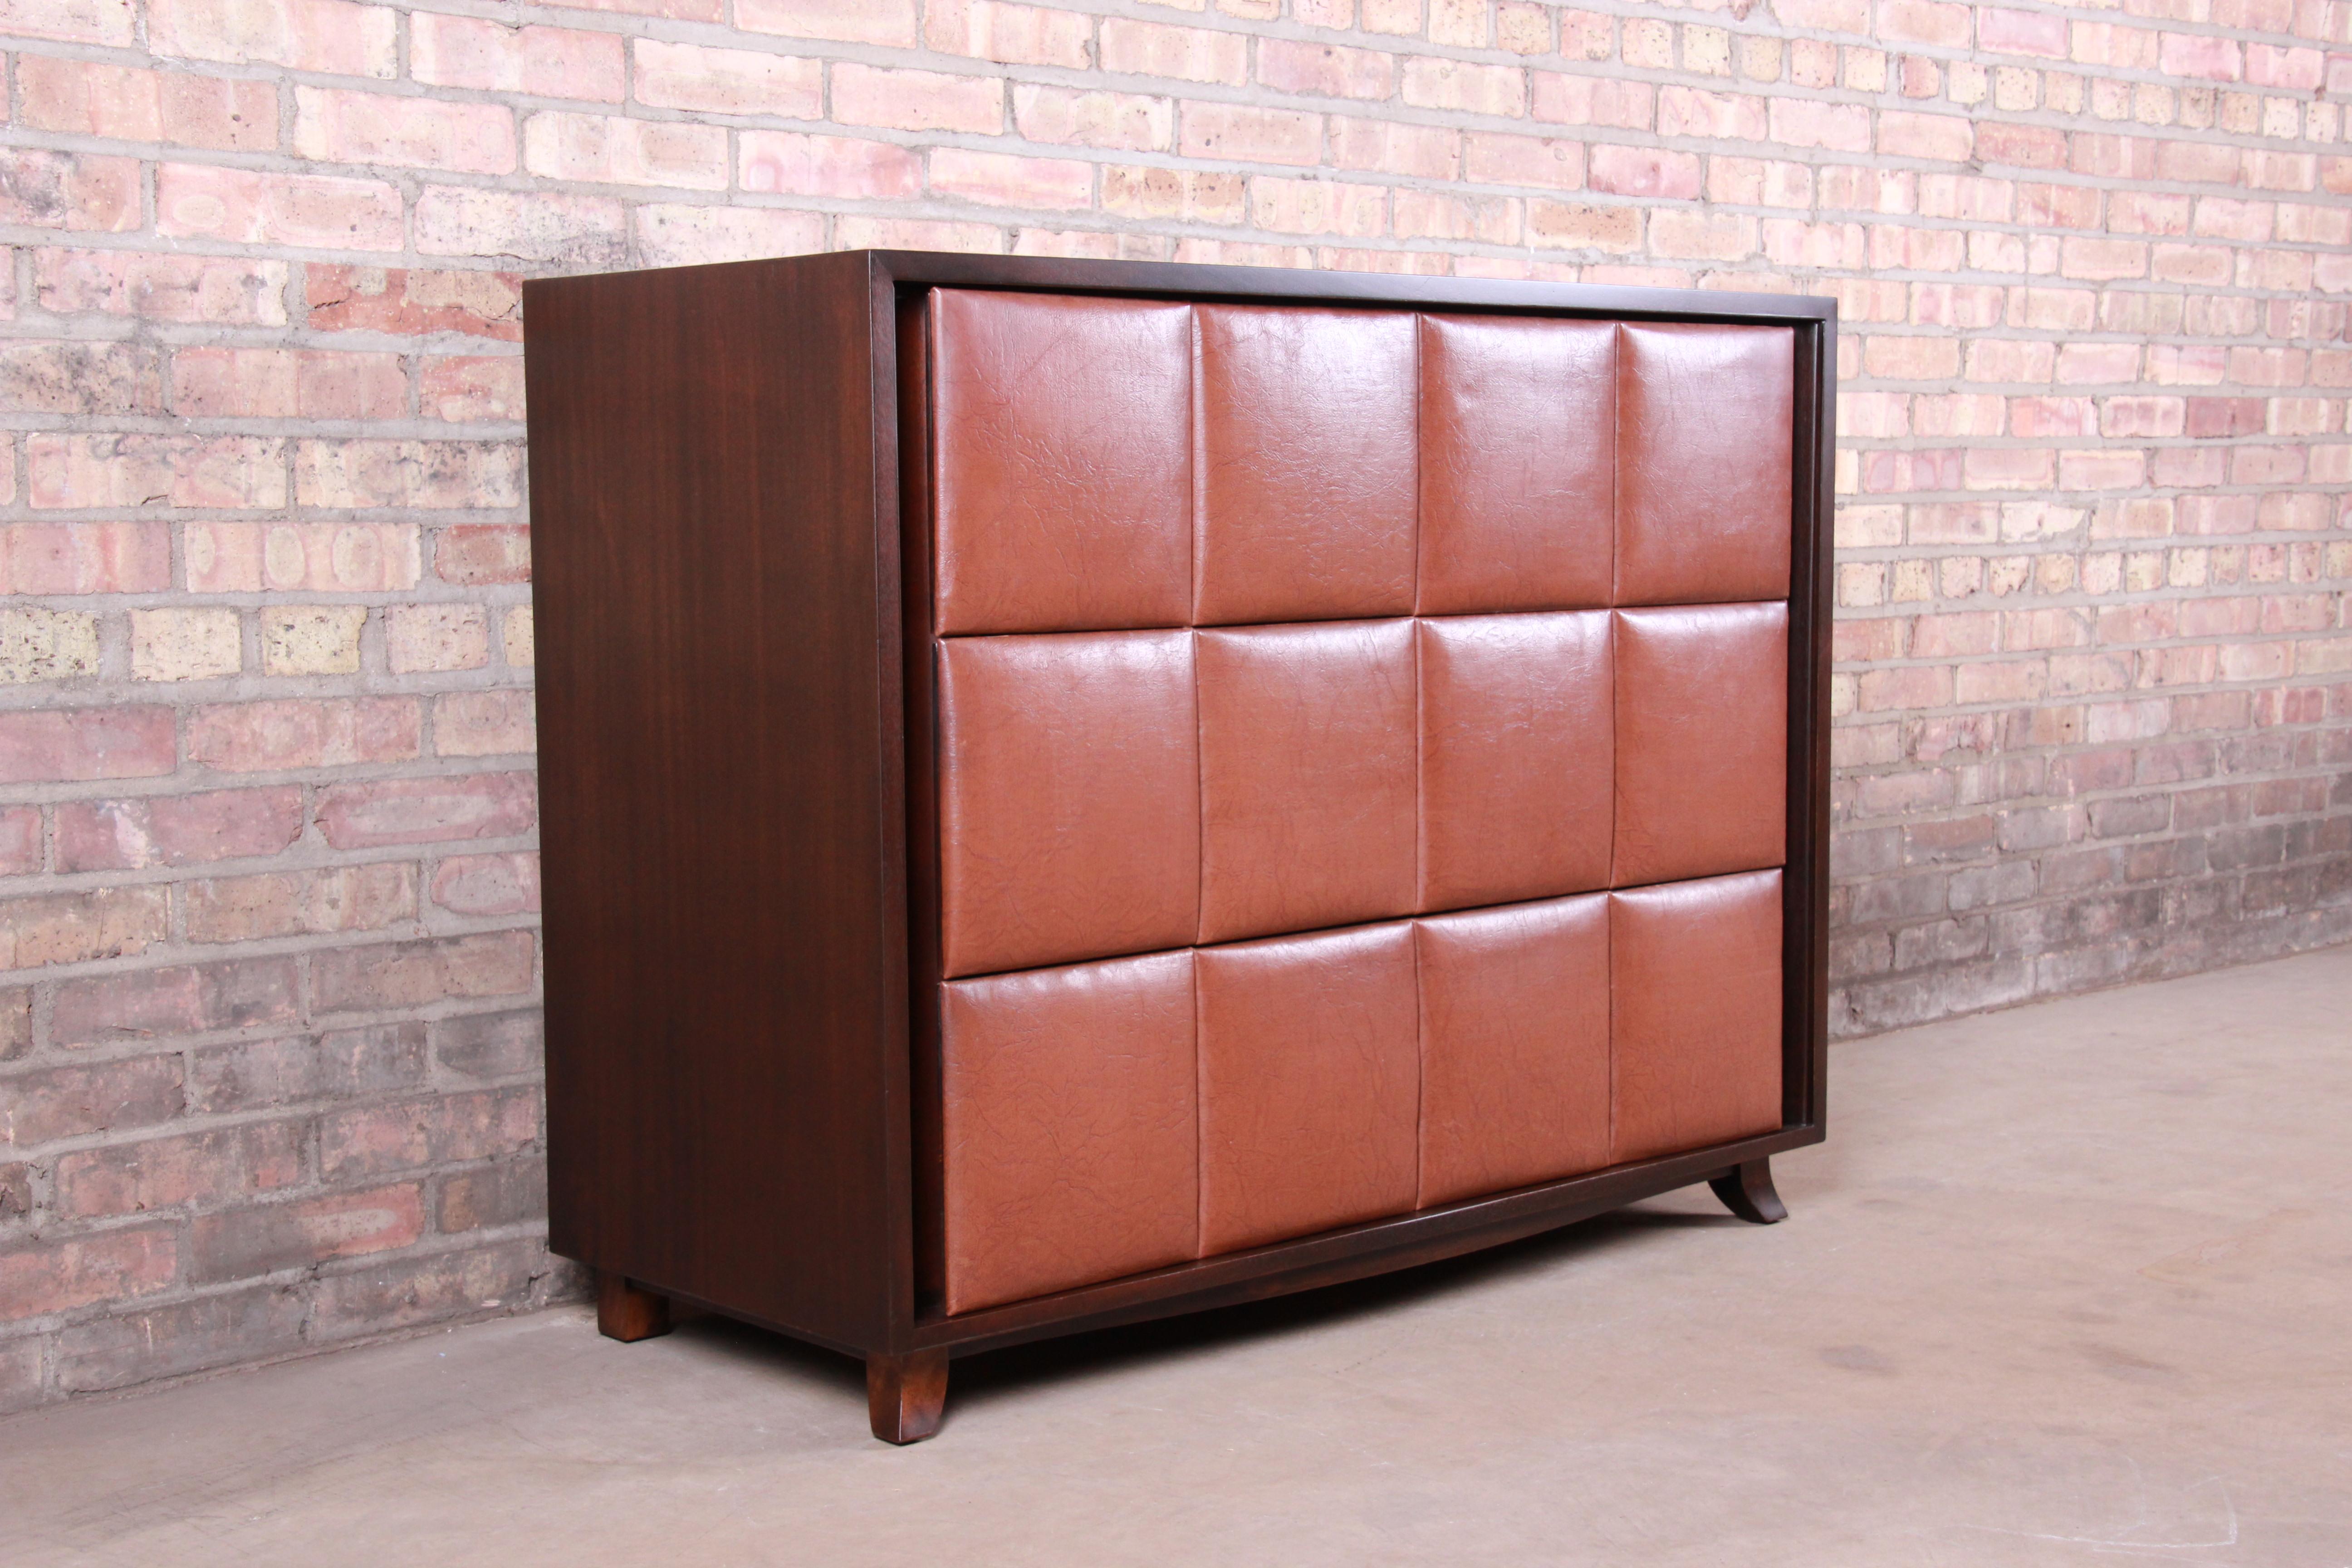 An exceptional Art Deco or Mid-Century Modern three-drawer bachelor chest or large nightstand

By Gilbert Rohde for Herman Miller

USA, circa 1930s

Mahogany case, with Naugahyde drawer fronts.

Measures: 44.25